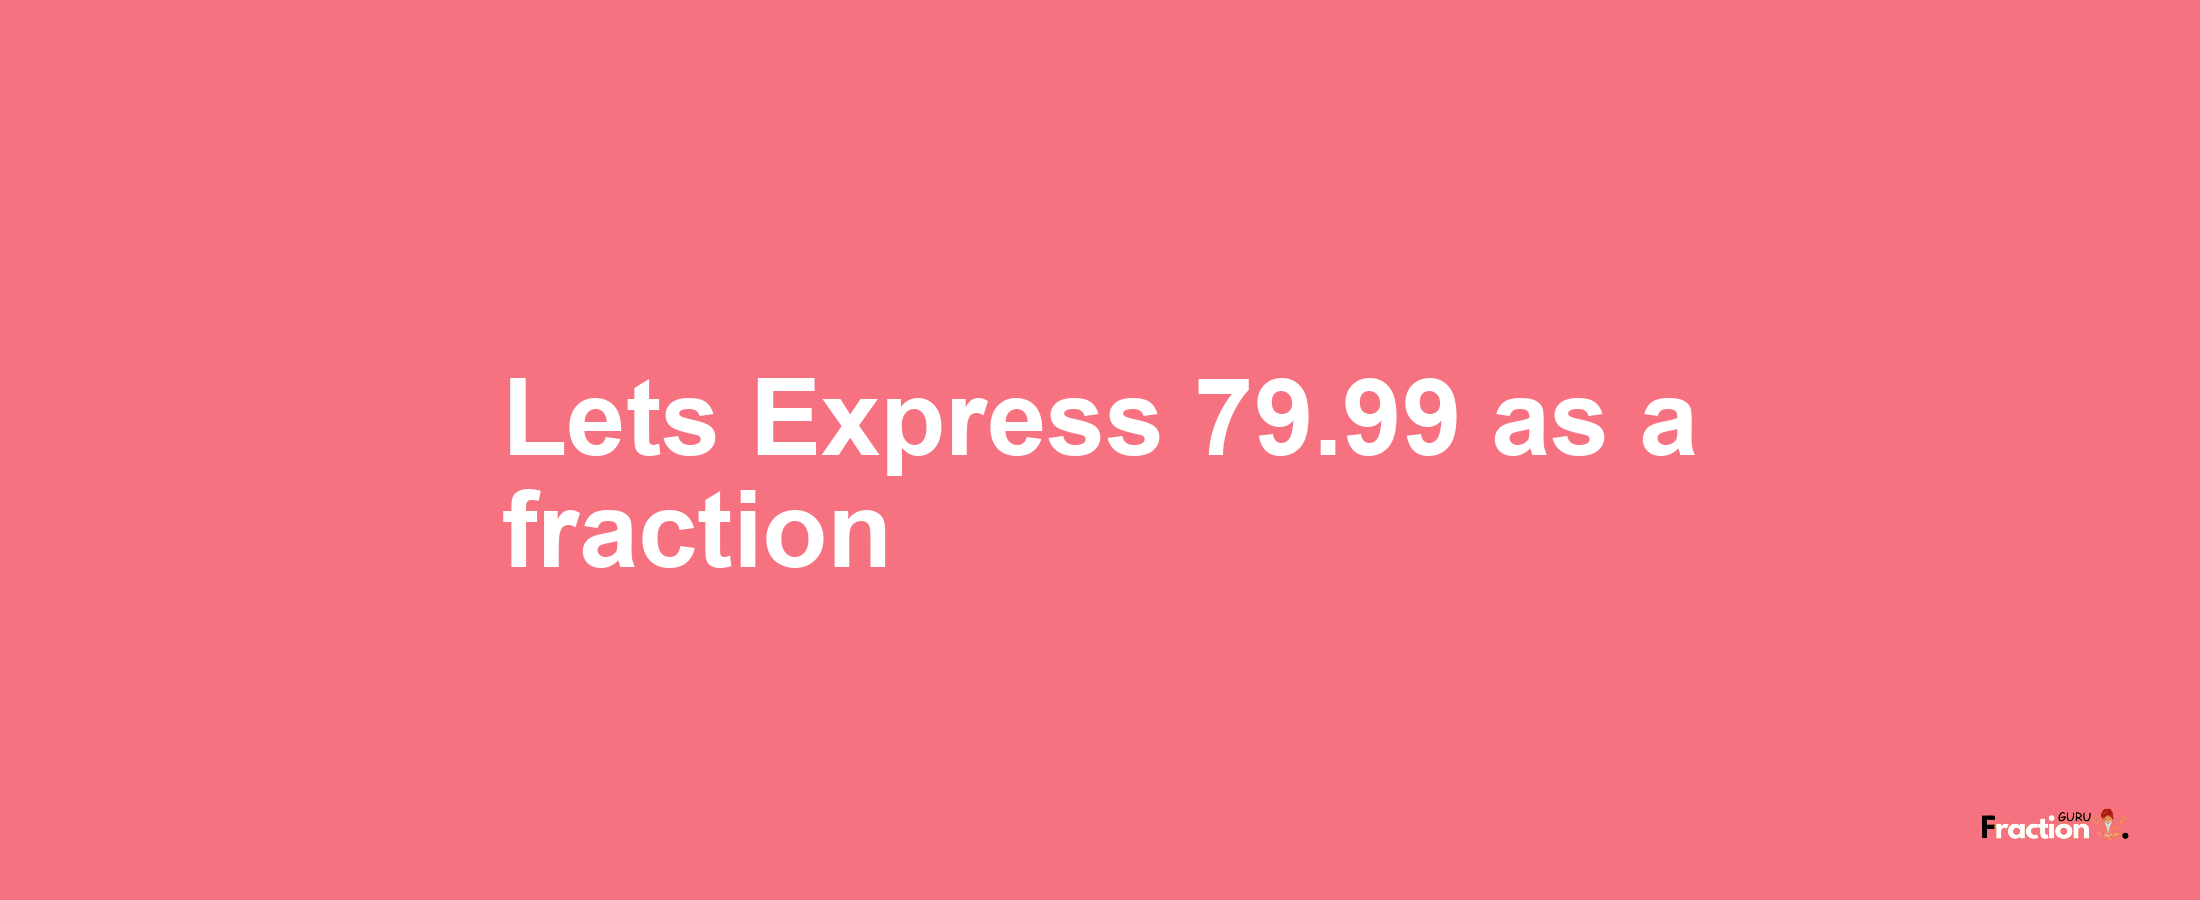 Lets Express 79.99 as afraction